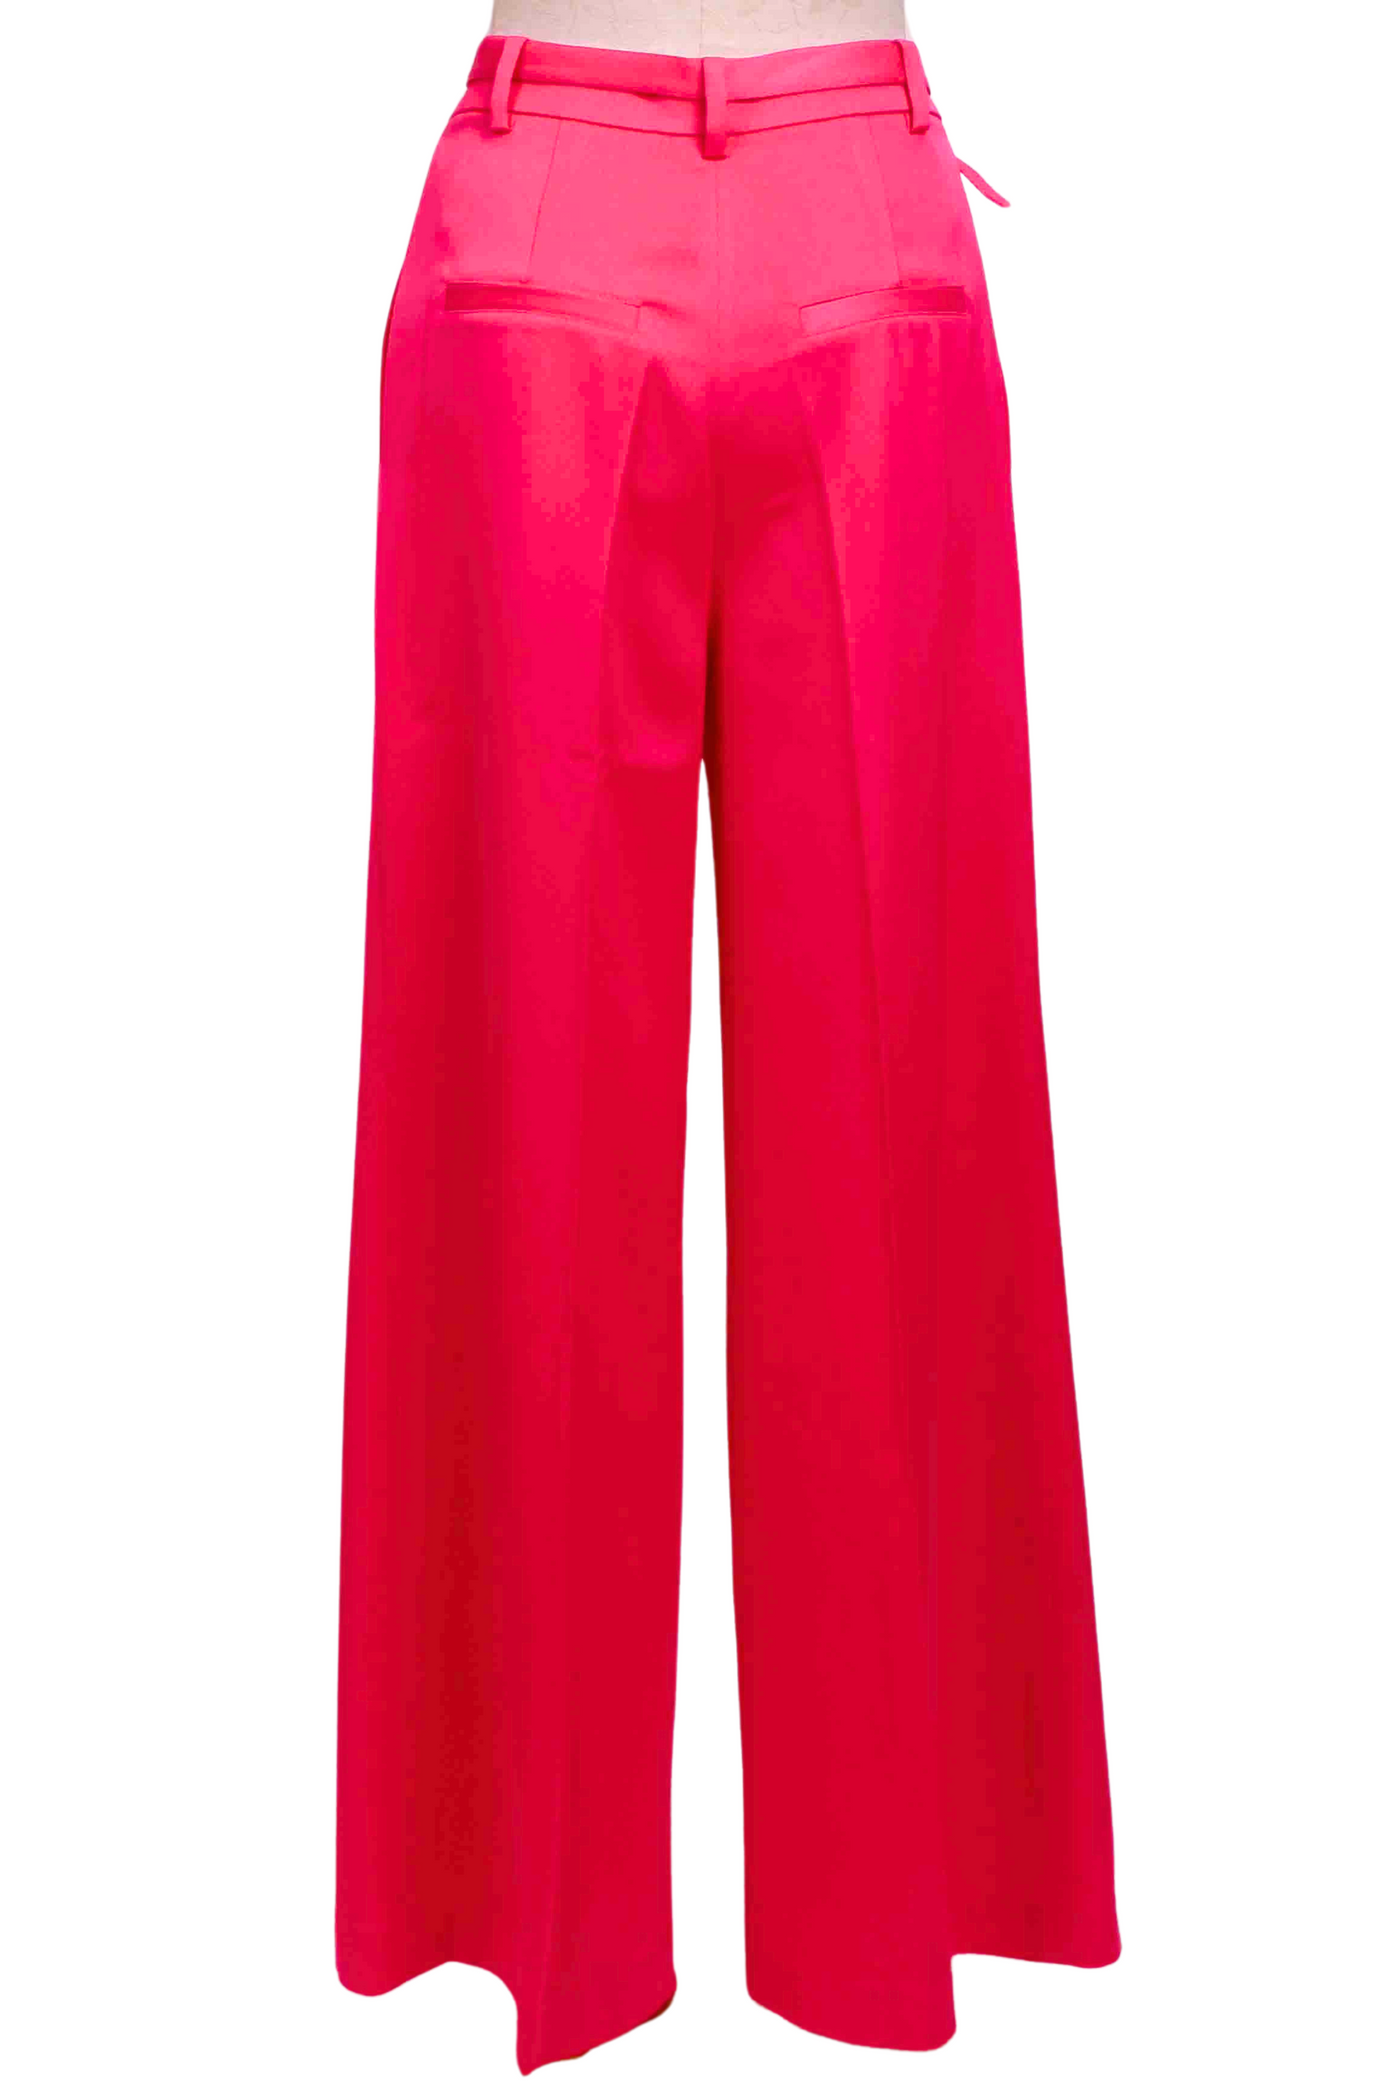 back view of Hot Pink Alexia Satin Pants by Generation Love